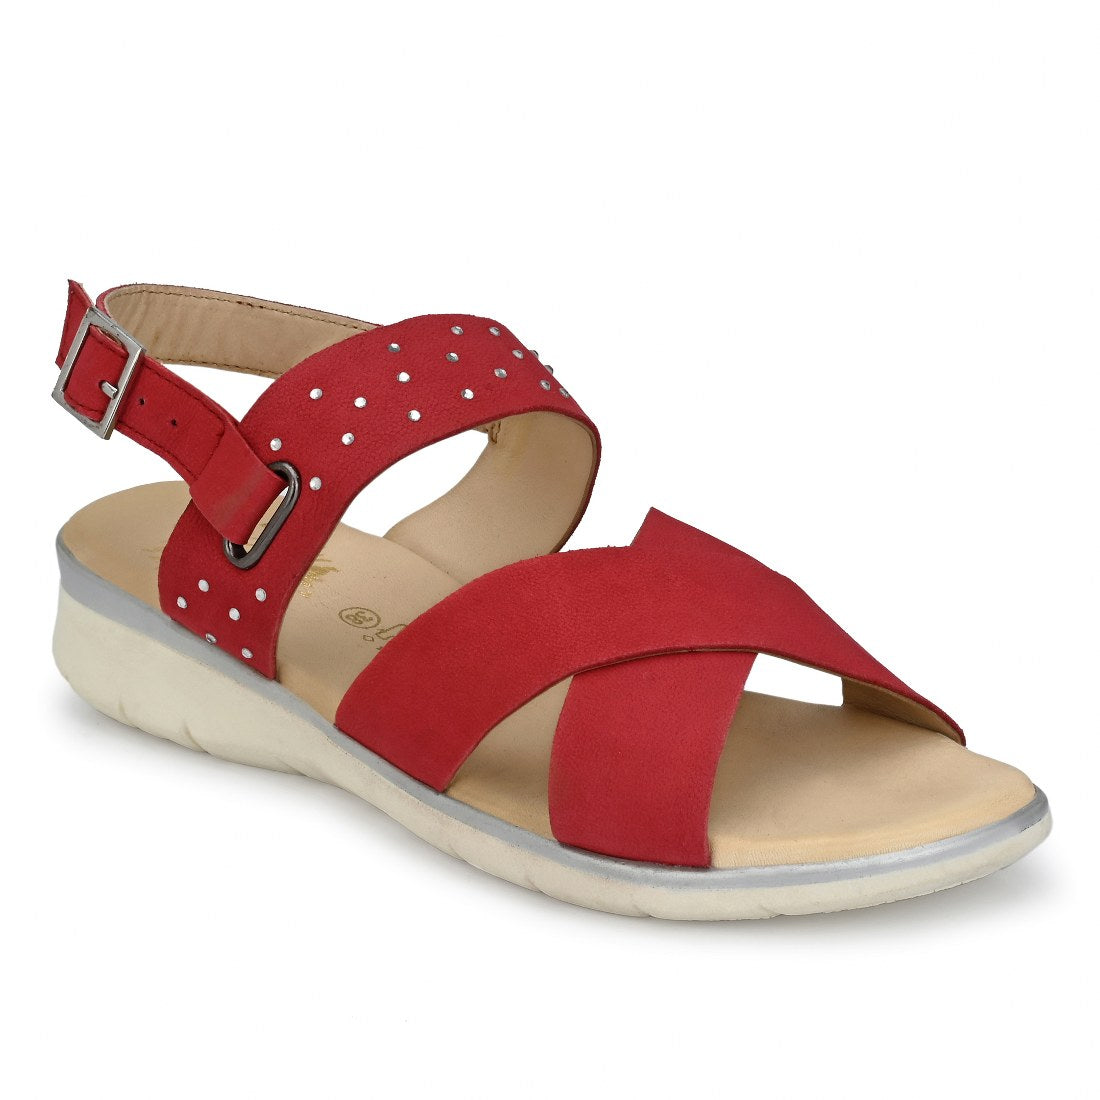 W-HR-TEMPE-55 WOMEN LEATHER RED CASUAL SANDAL OPEN